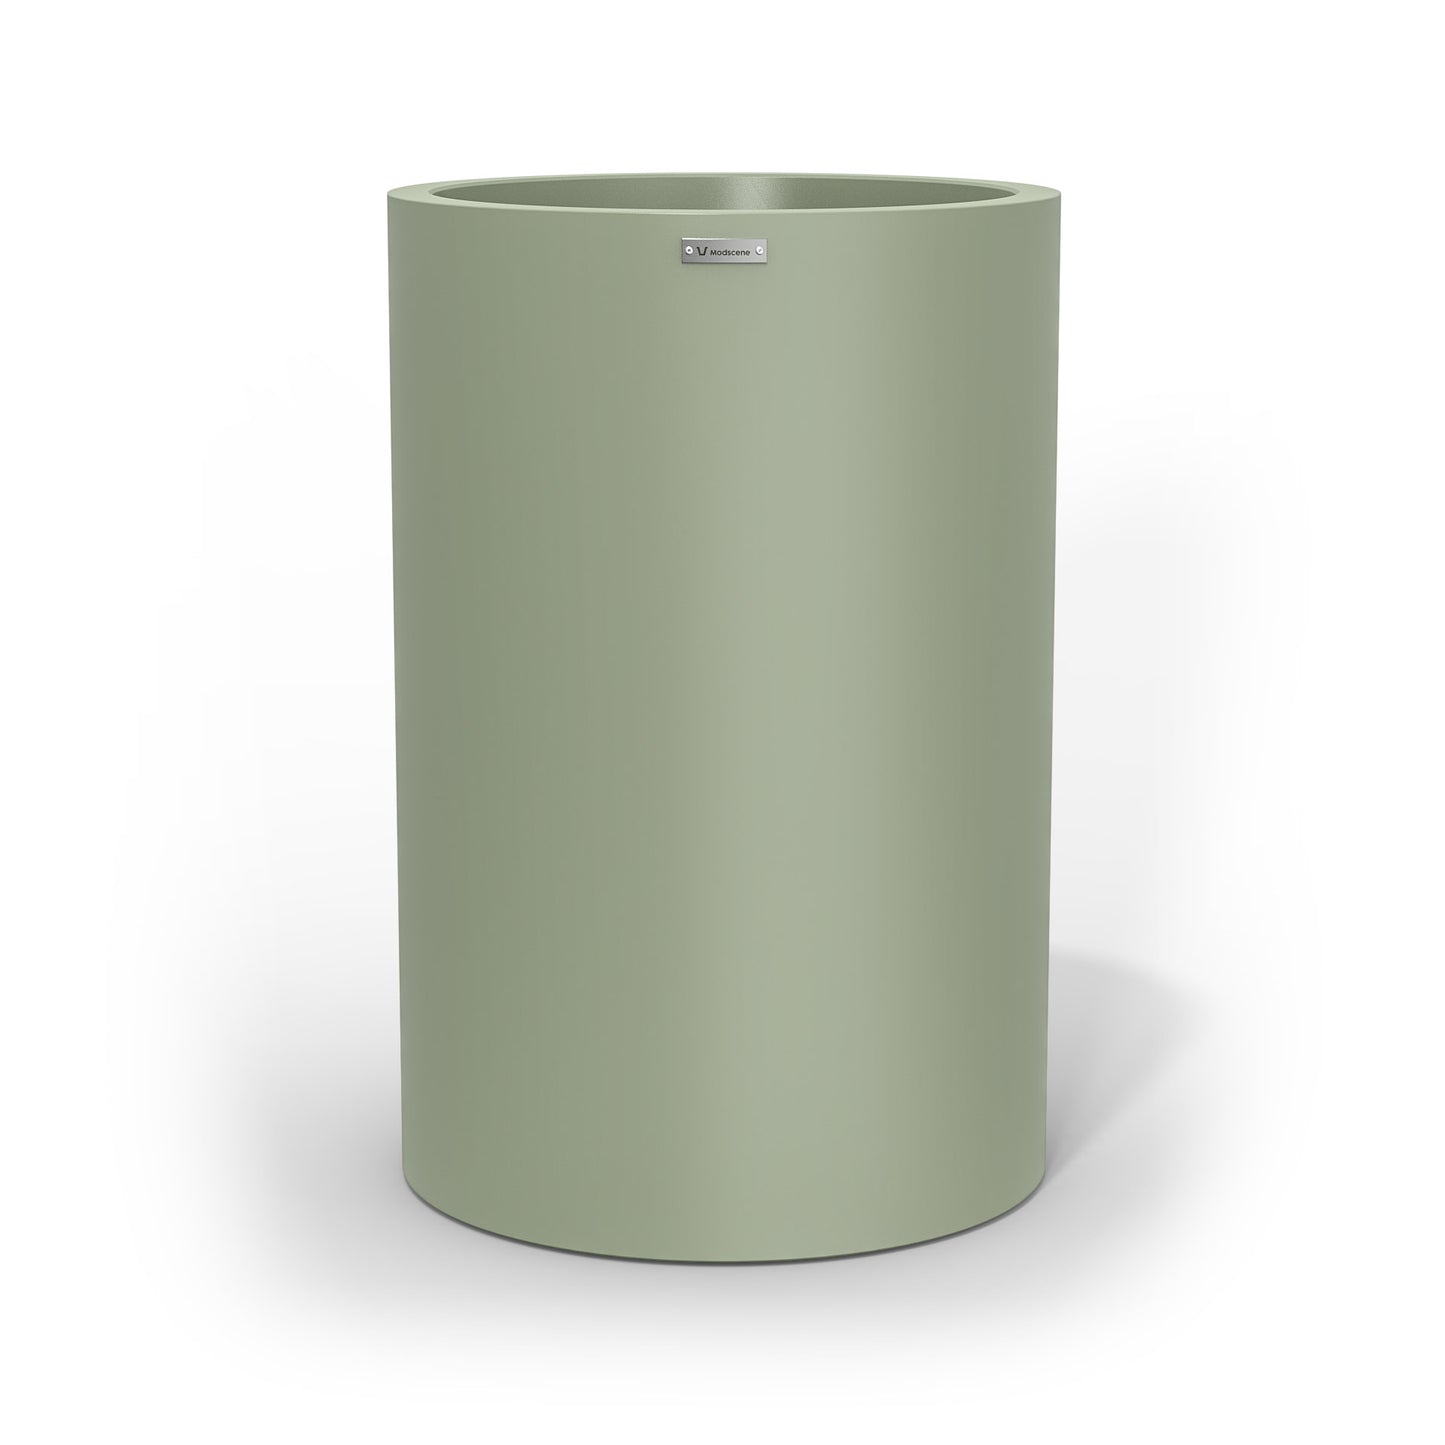 Large Modscene cylinder shaped planter pot in a moss green colour. NZ made.